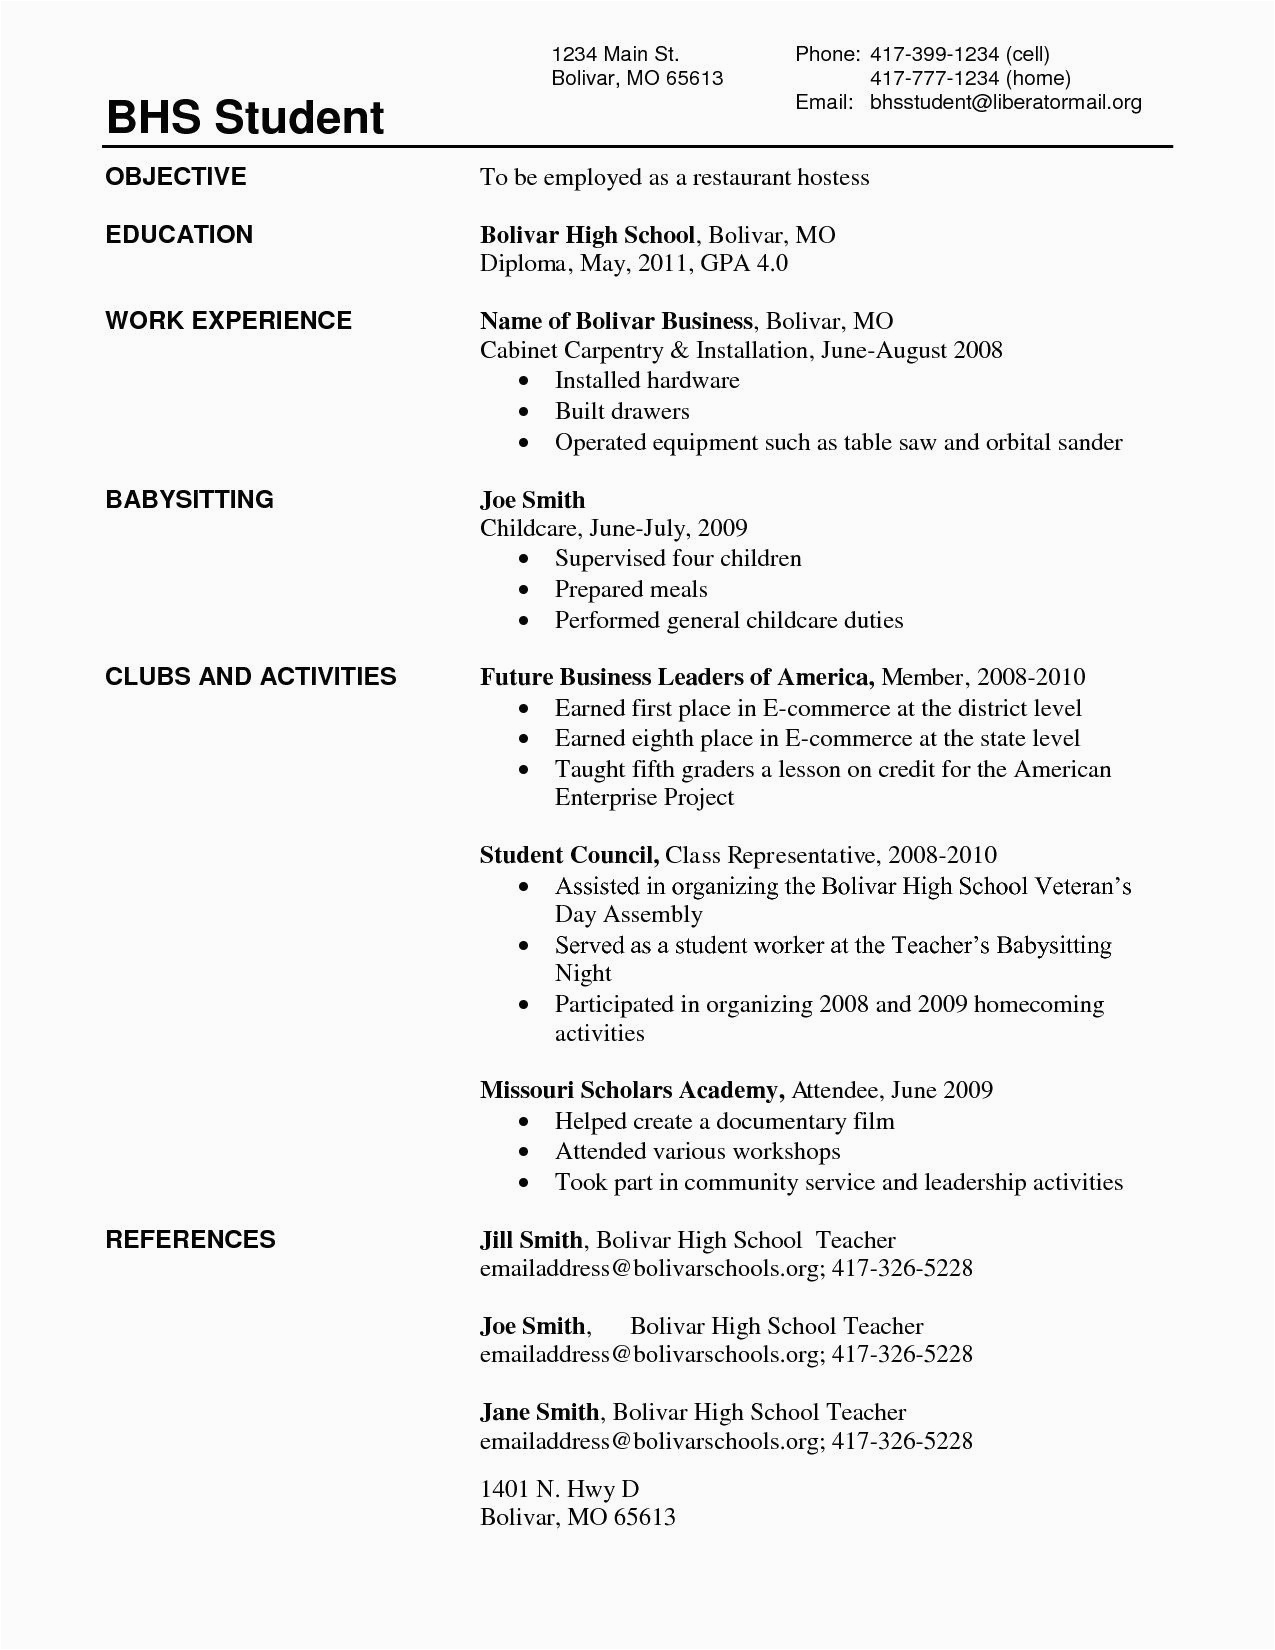 Sample Resume without High School Diploma 67 Best Image Resume Examples for College Graduate